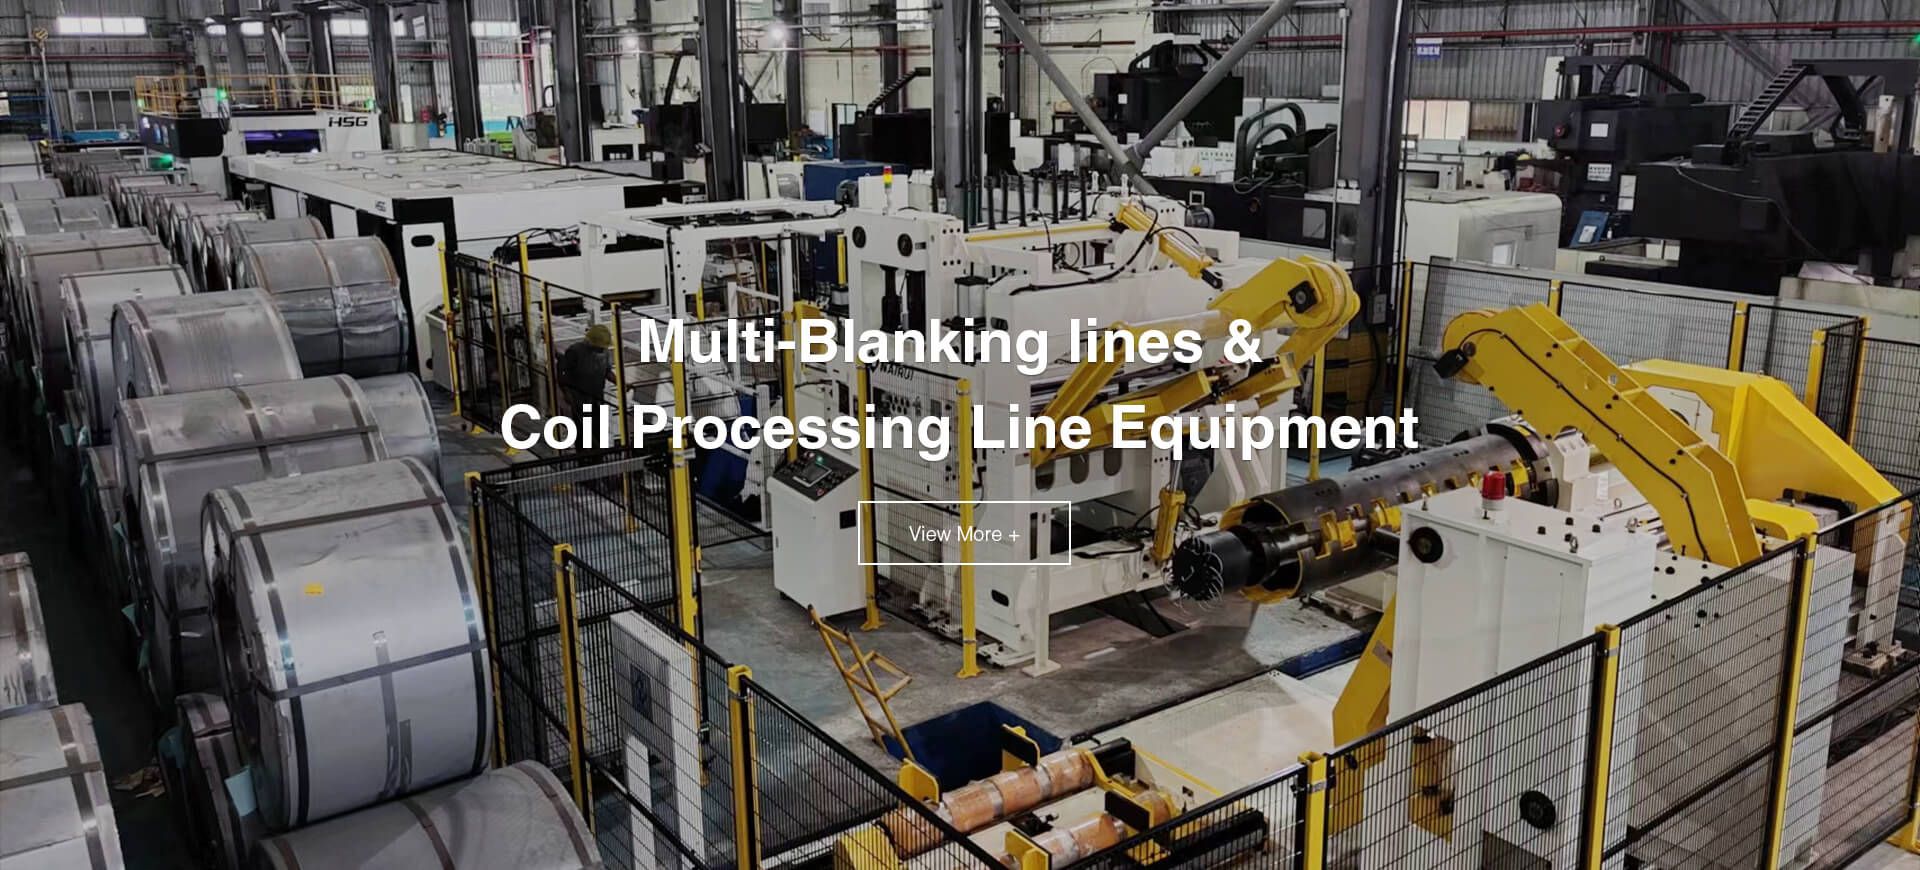 Multi-Blanking Lines & Coil Processing Line Equipment